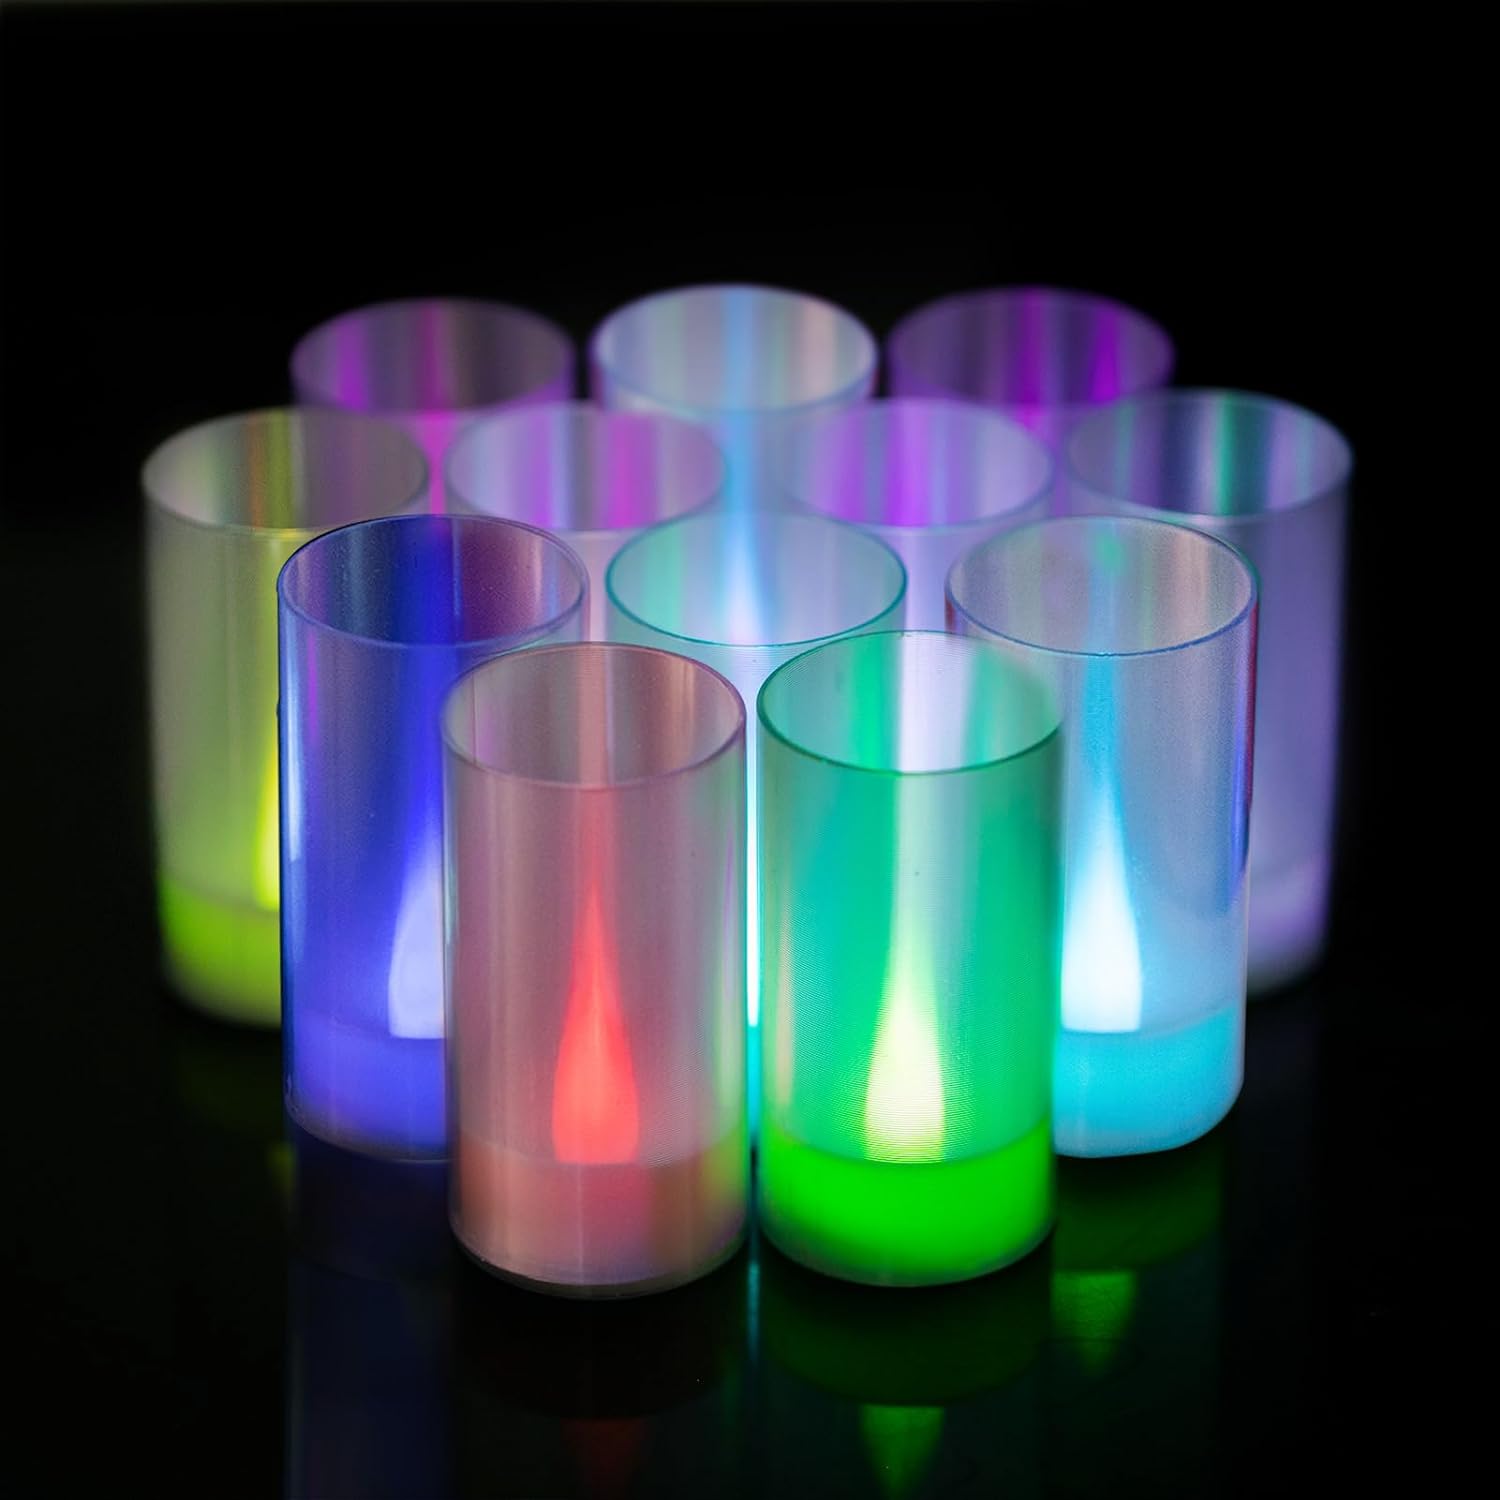 LANKER Flameless Candles, Battery Operated LED Pillar Candles, D1.5 x H3 inch, 7 Color Changing Long Flame-Effect, Romantic Electronic Fake Votive Candles, Set of 12 (Color Changing)